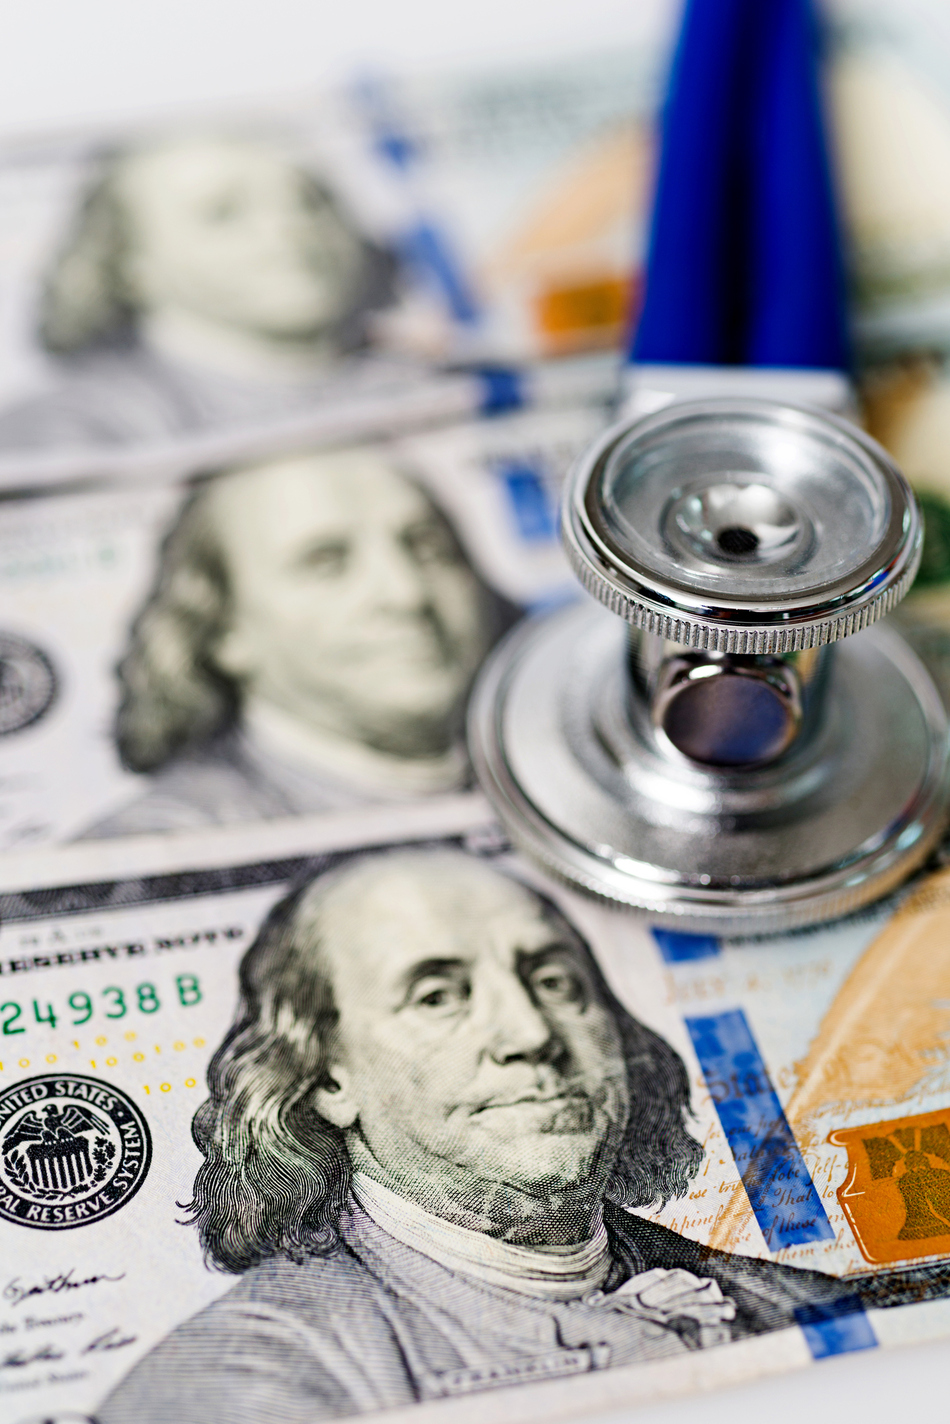 Health Minute: Leadership Is Needed to Control Health Care Spending